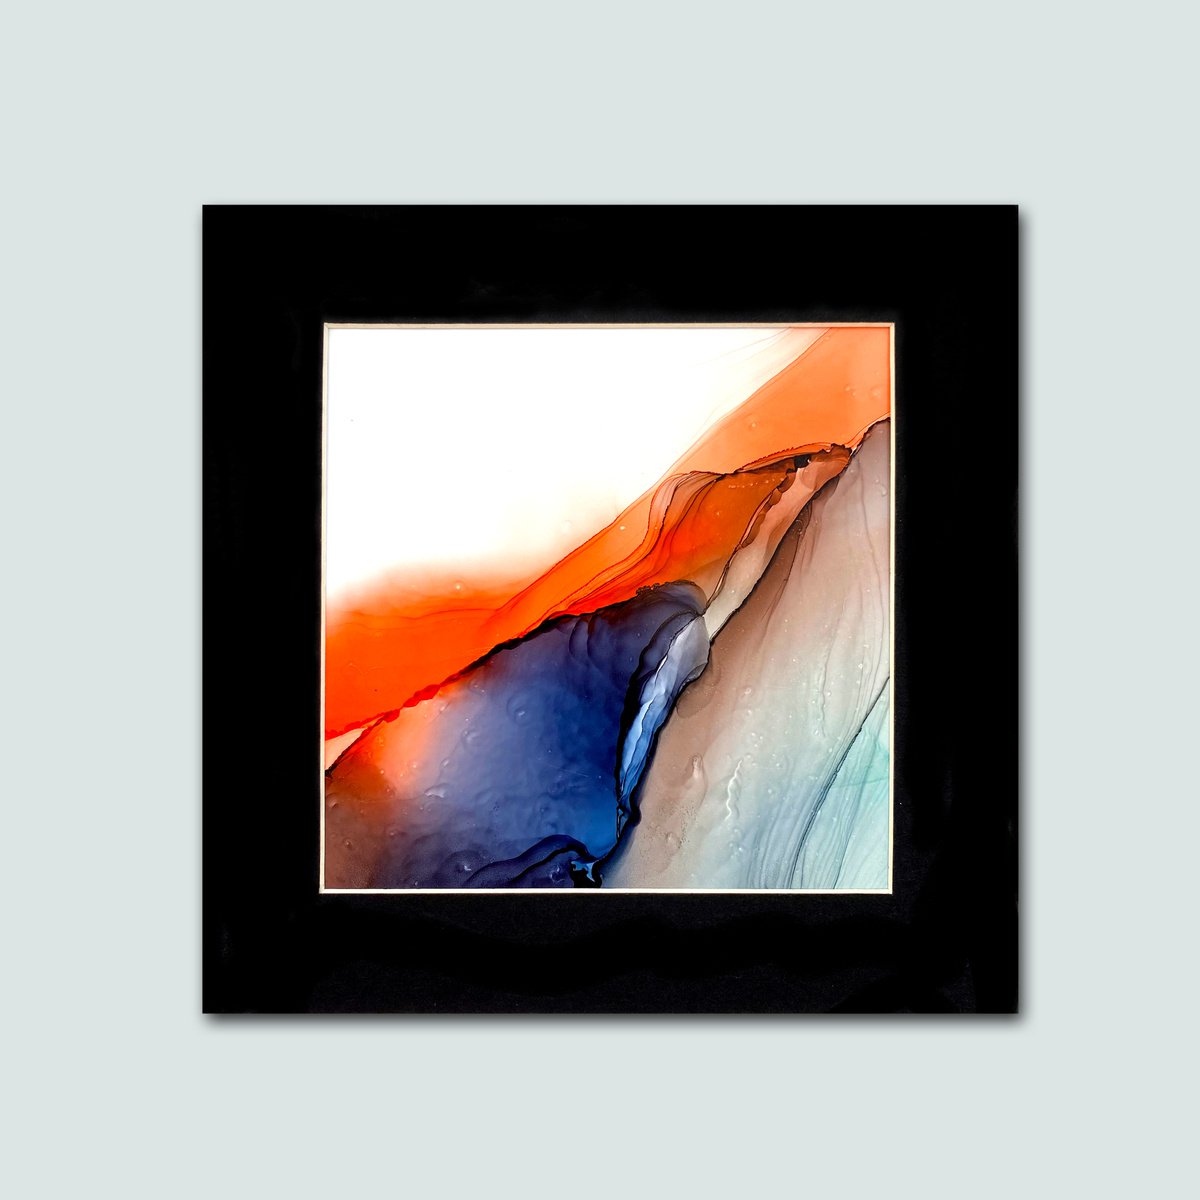 Volcano abstract landsacape in red and blue colors with gold, home decor , gift idea by Irina Povaliaeva